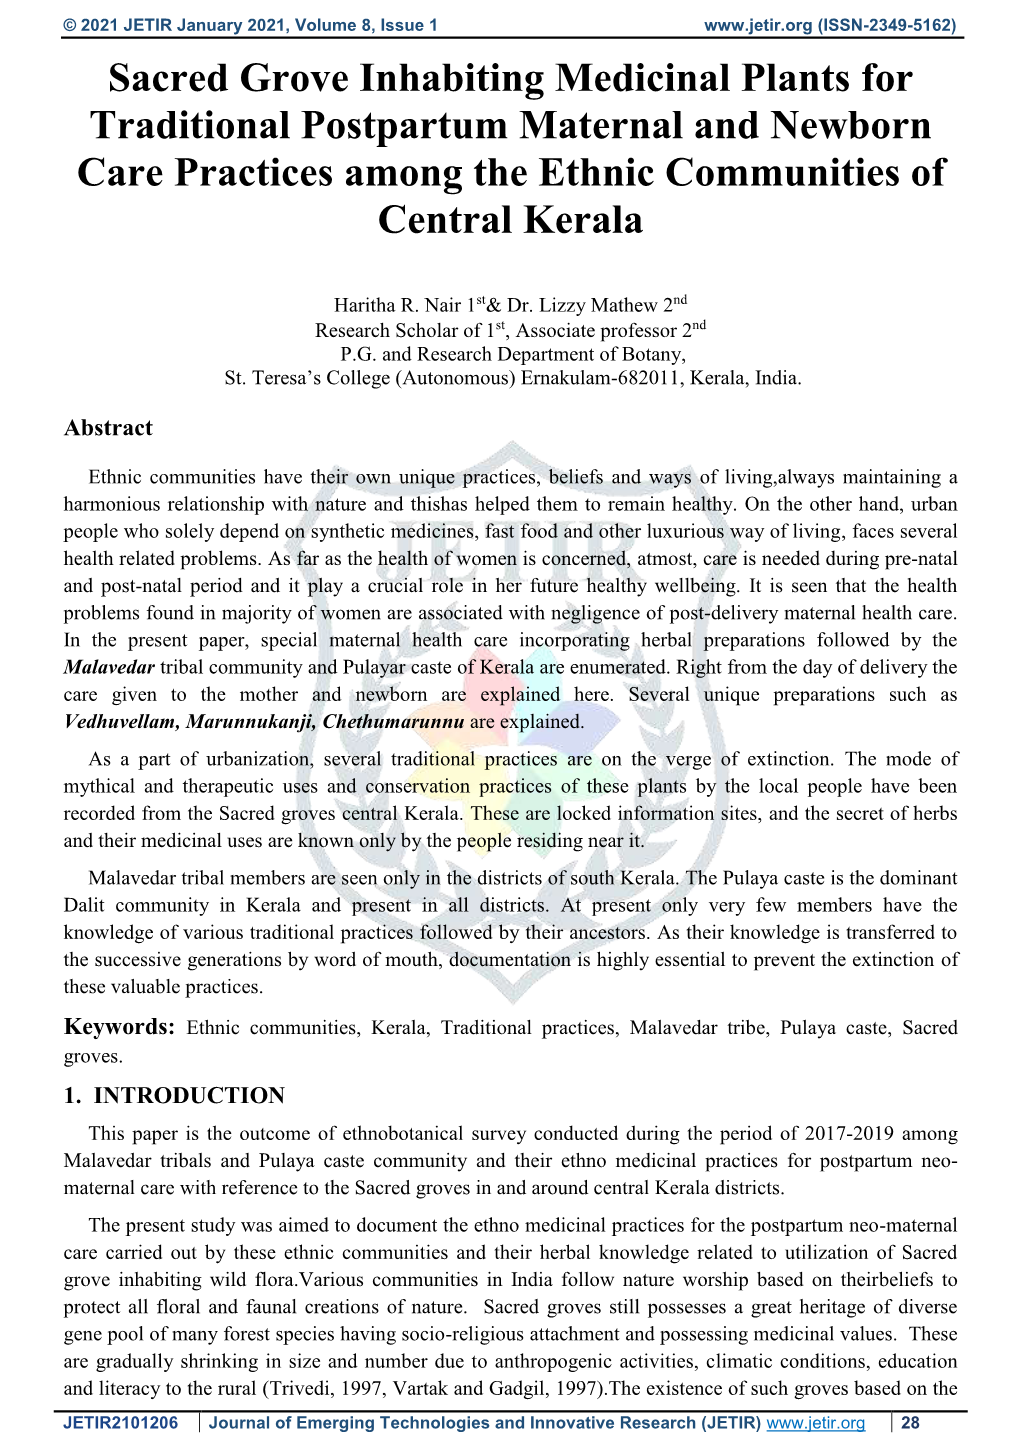 Sacred Grove Inhabiting Medicinal Plants for Traditional Postpartum Maternal and Newborn Care Practices Among the Ethnic Communities of Central Kerala